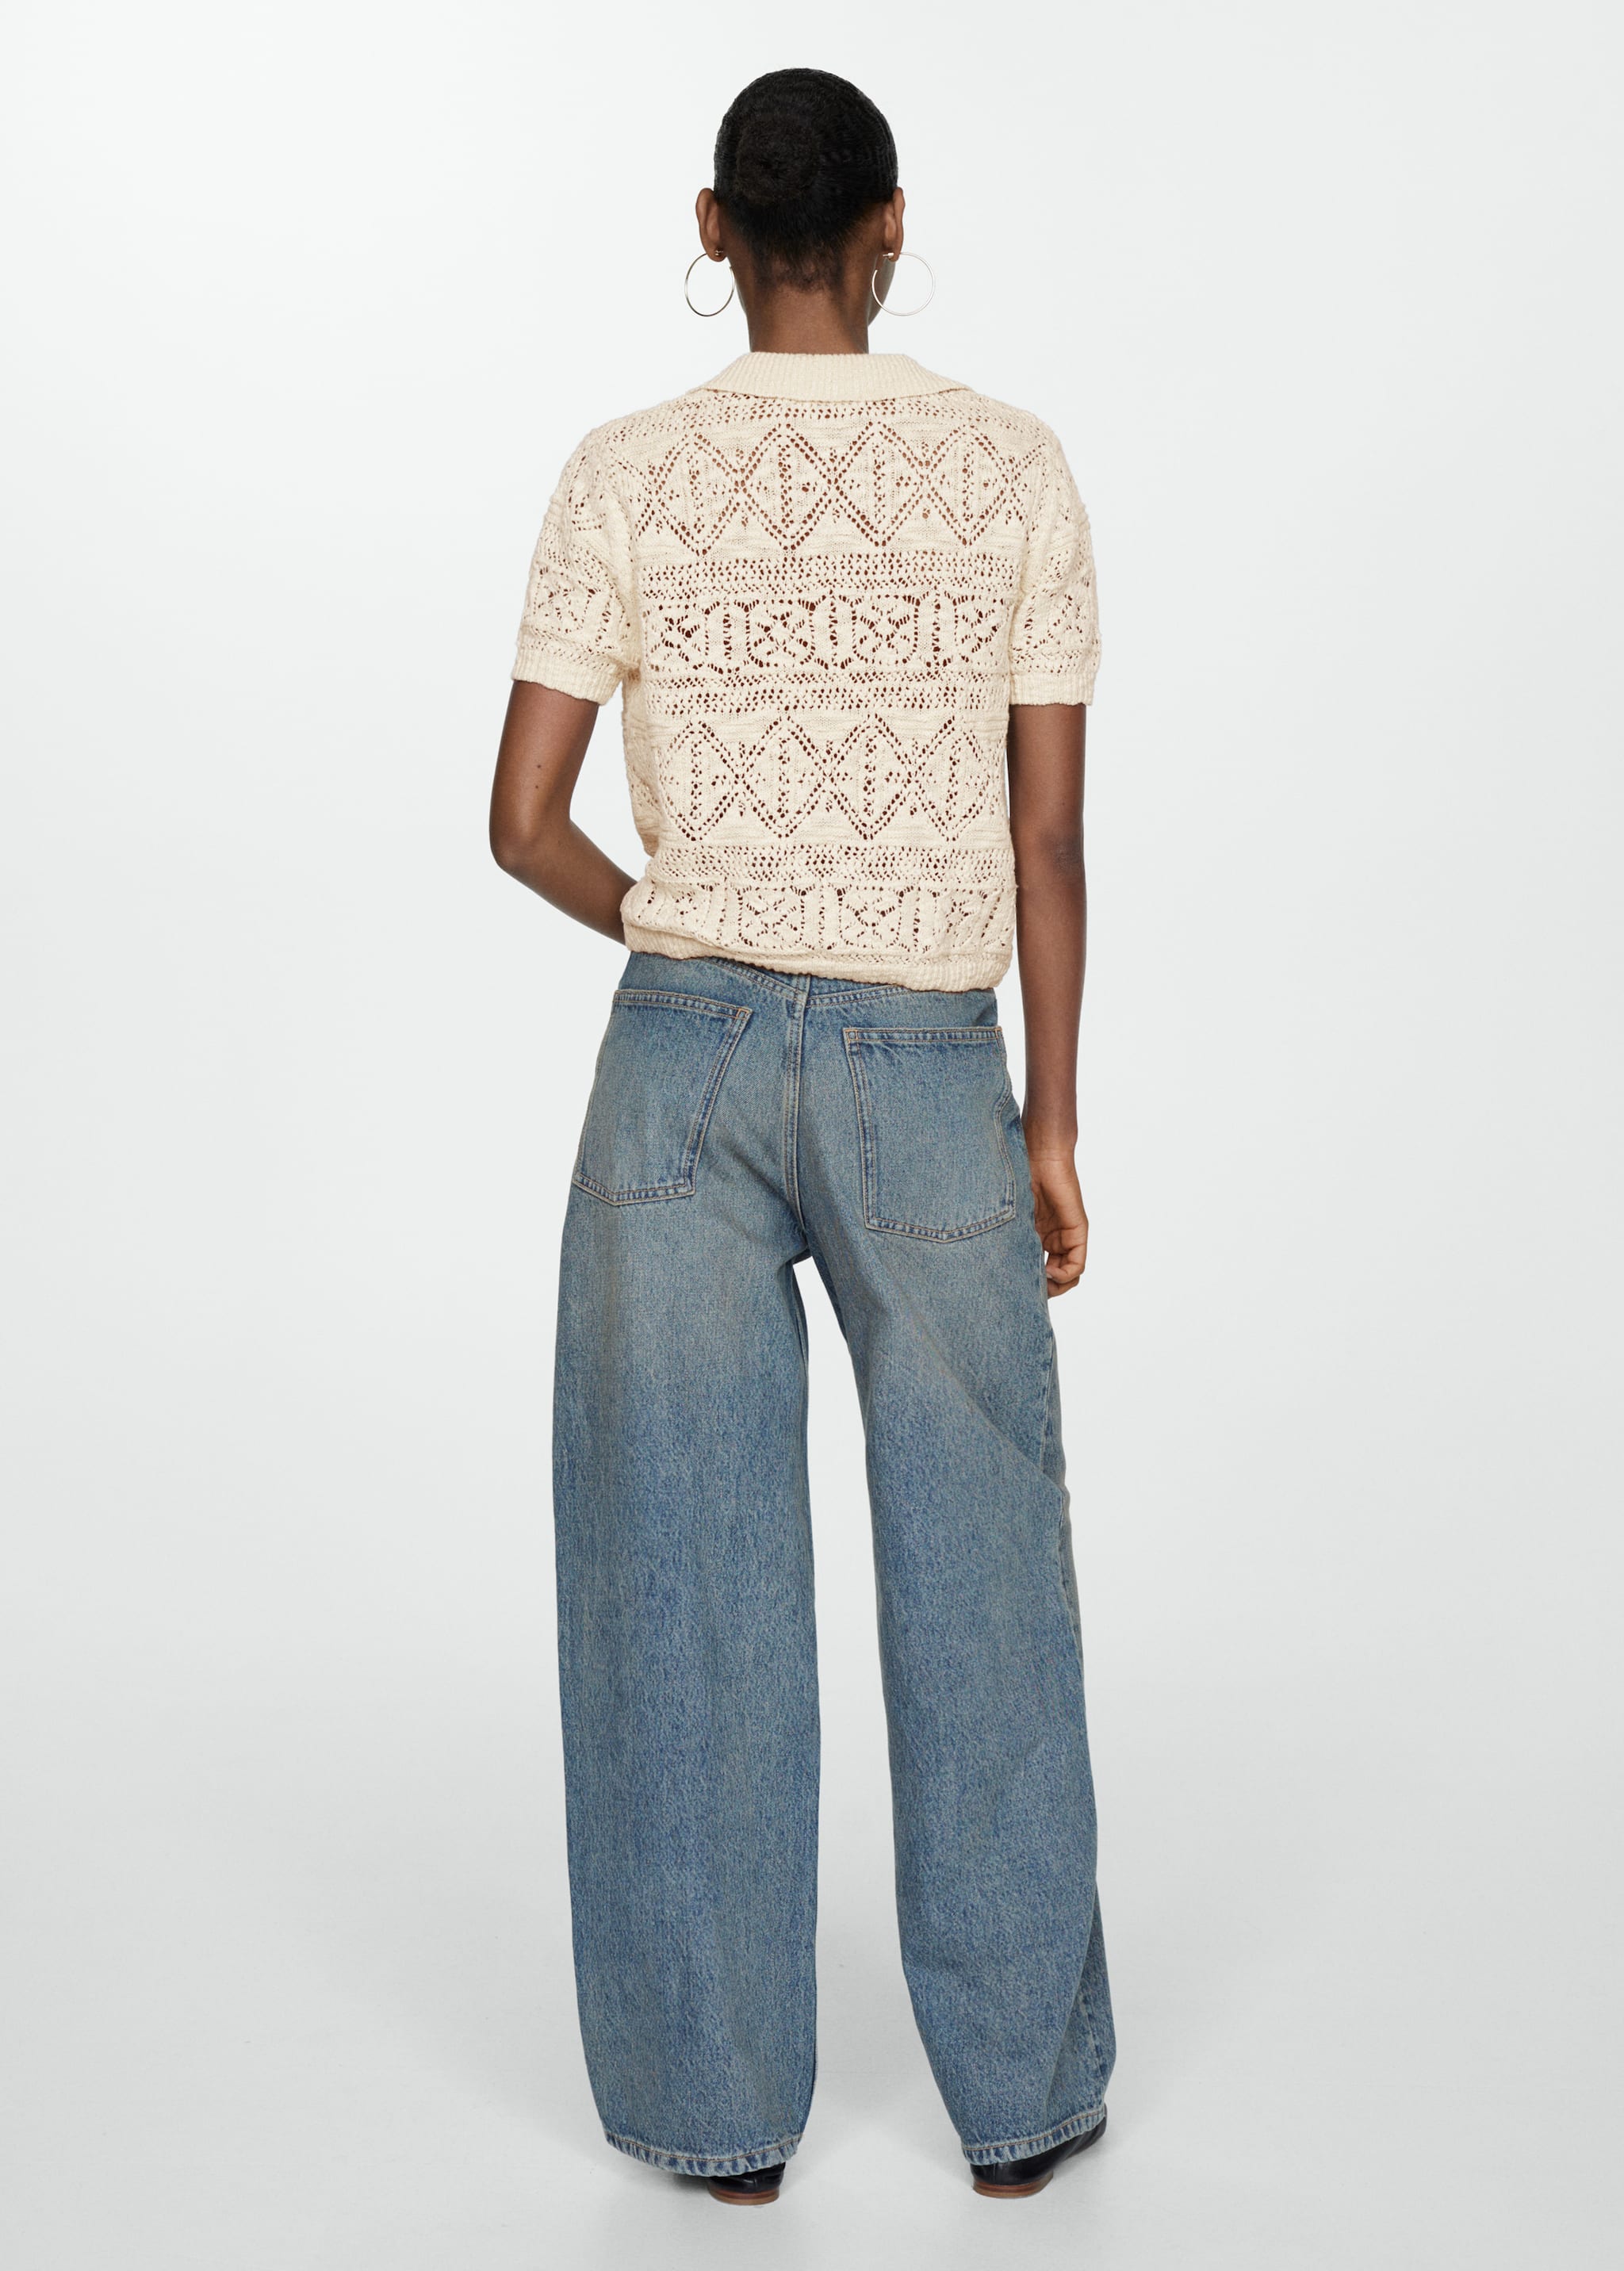 Knitted sweater with openwork details - Reverse of the article